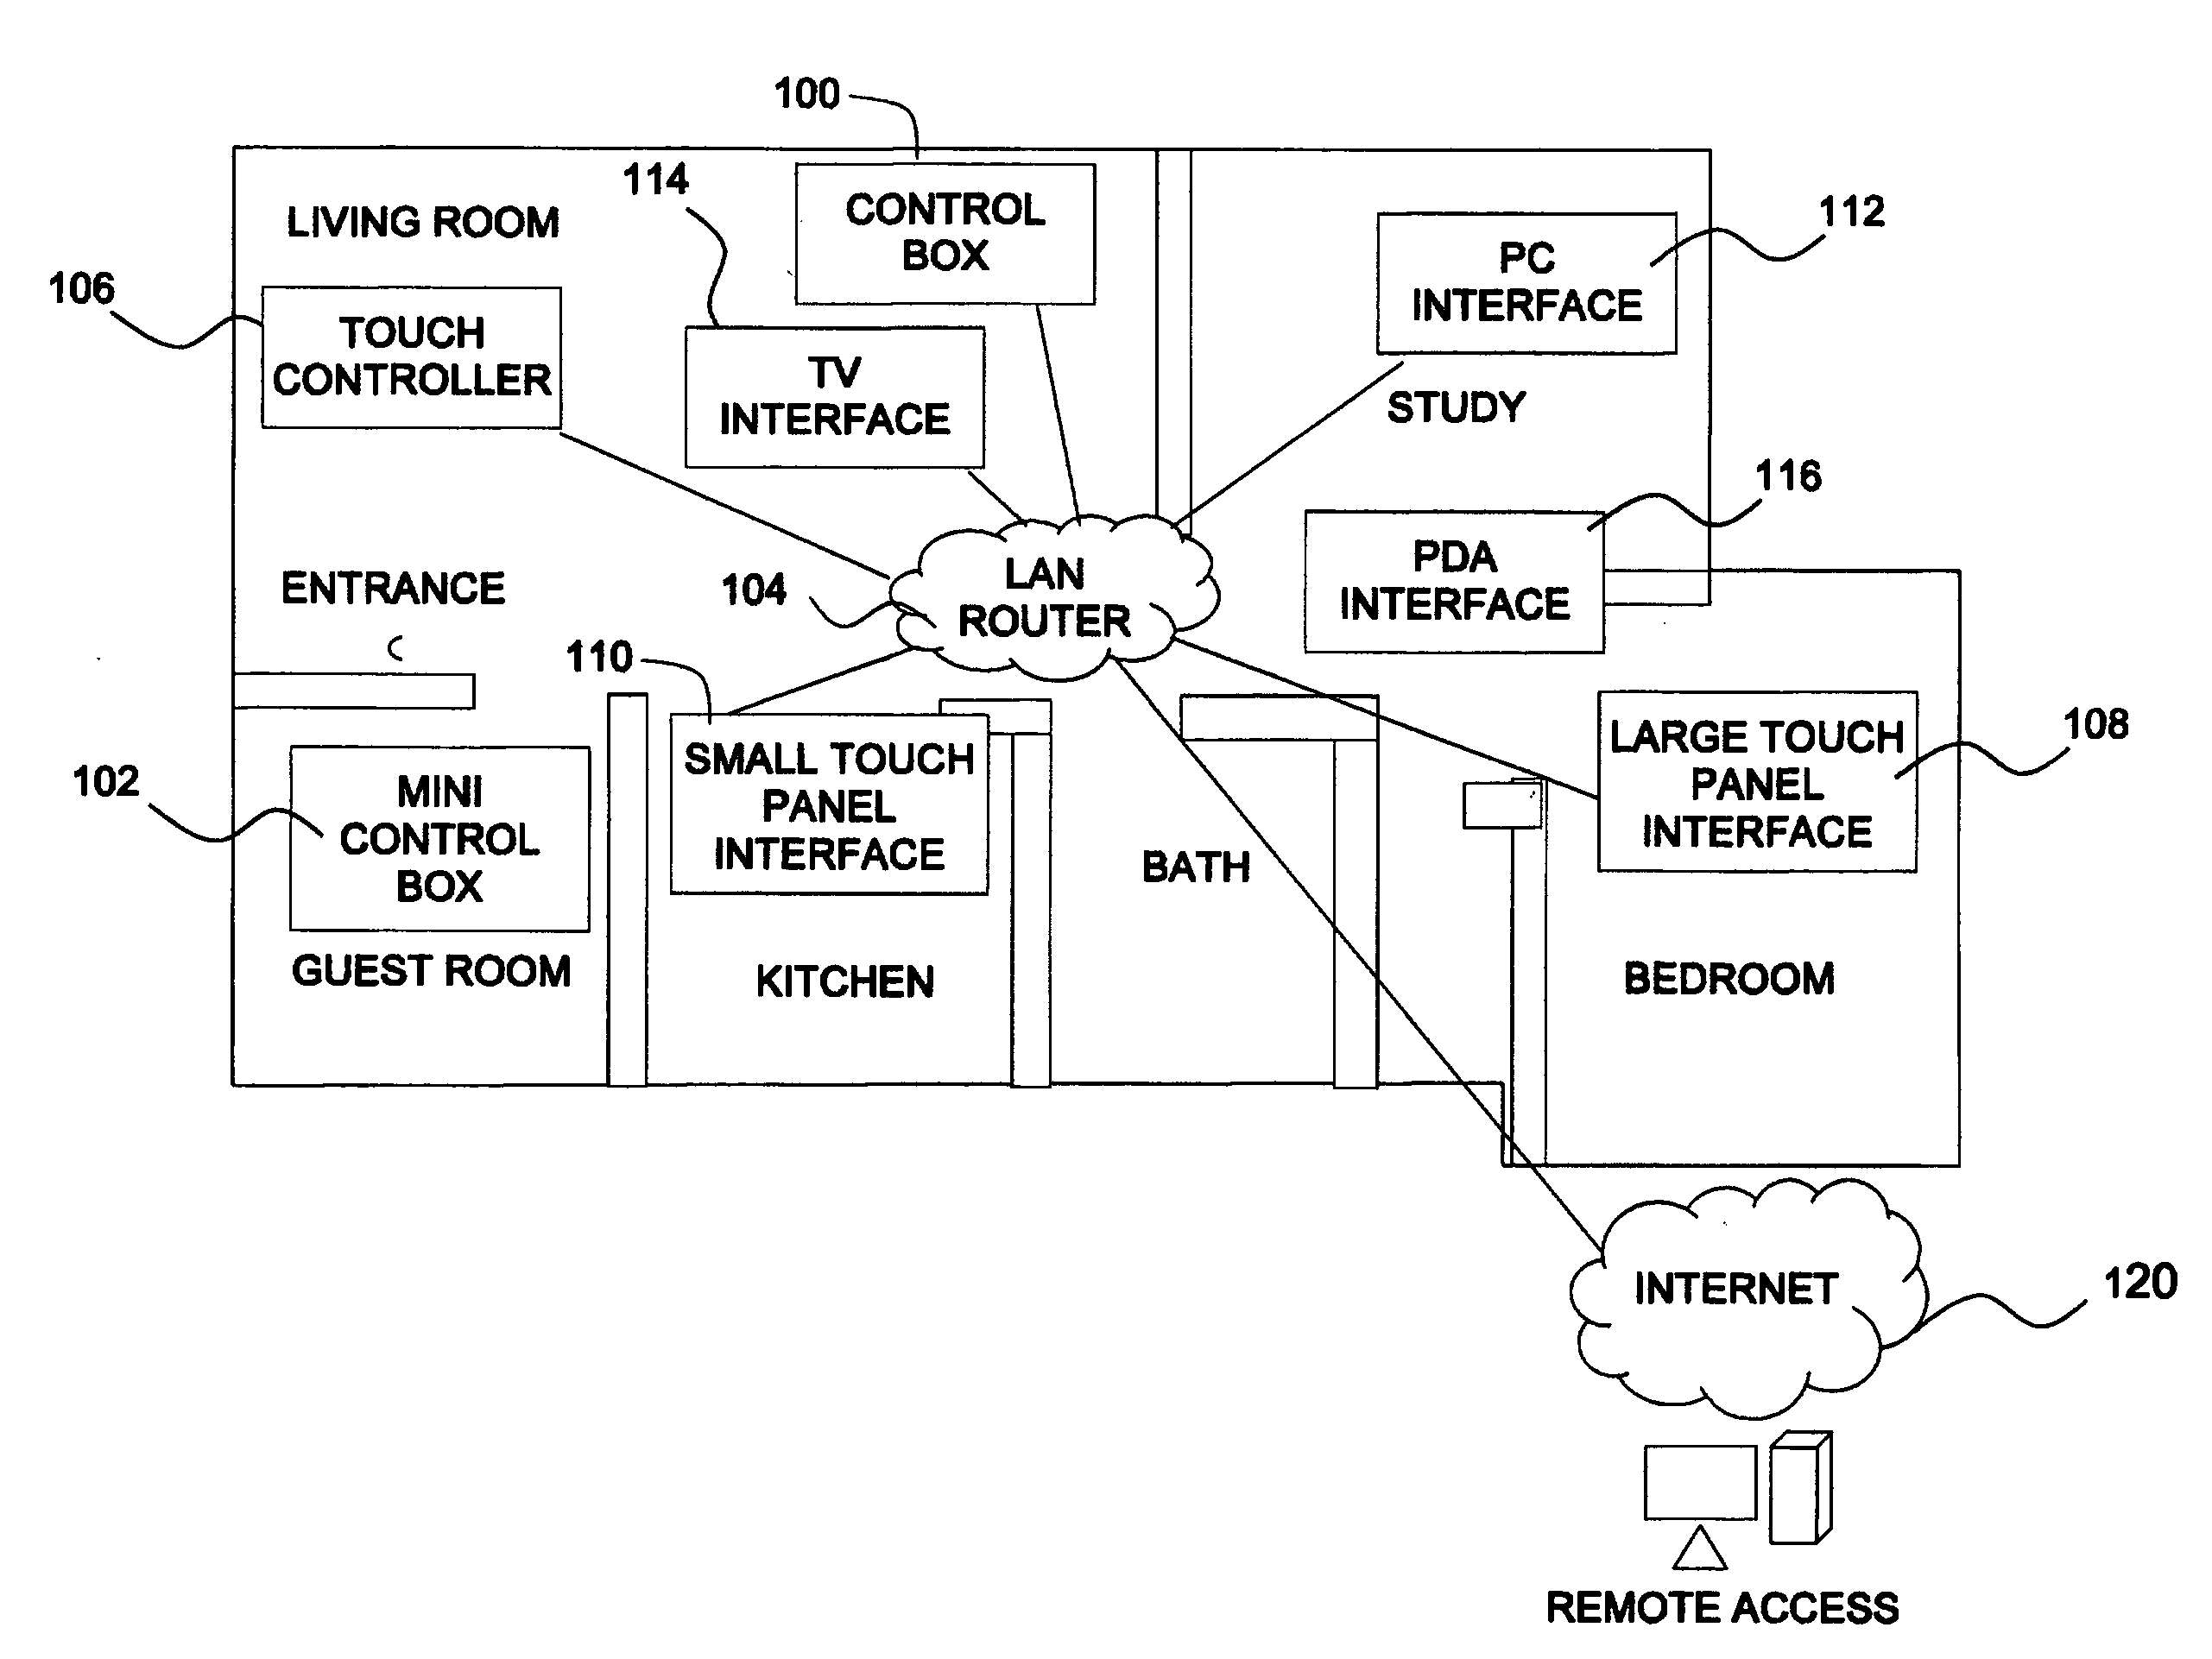 Networked Device Control Architecture